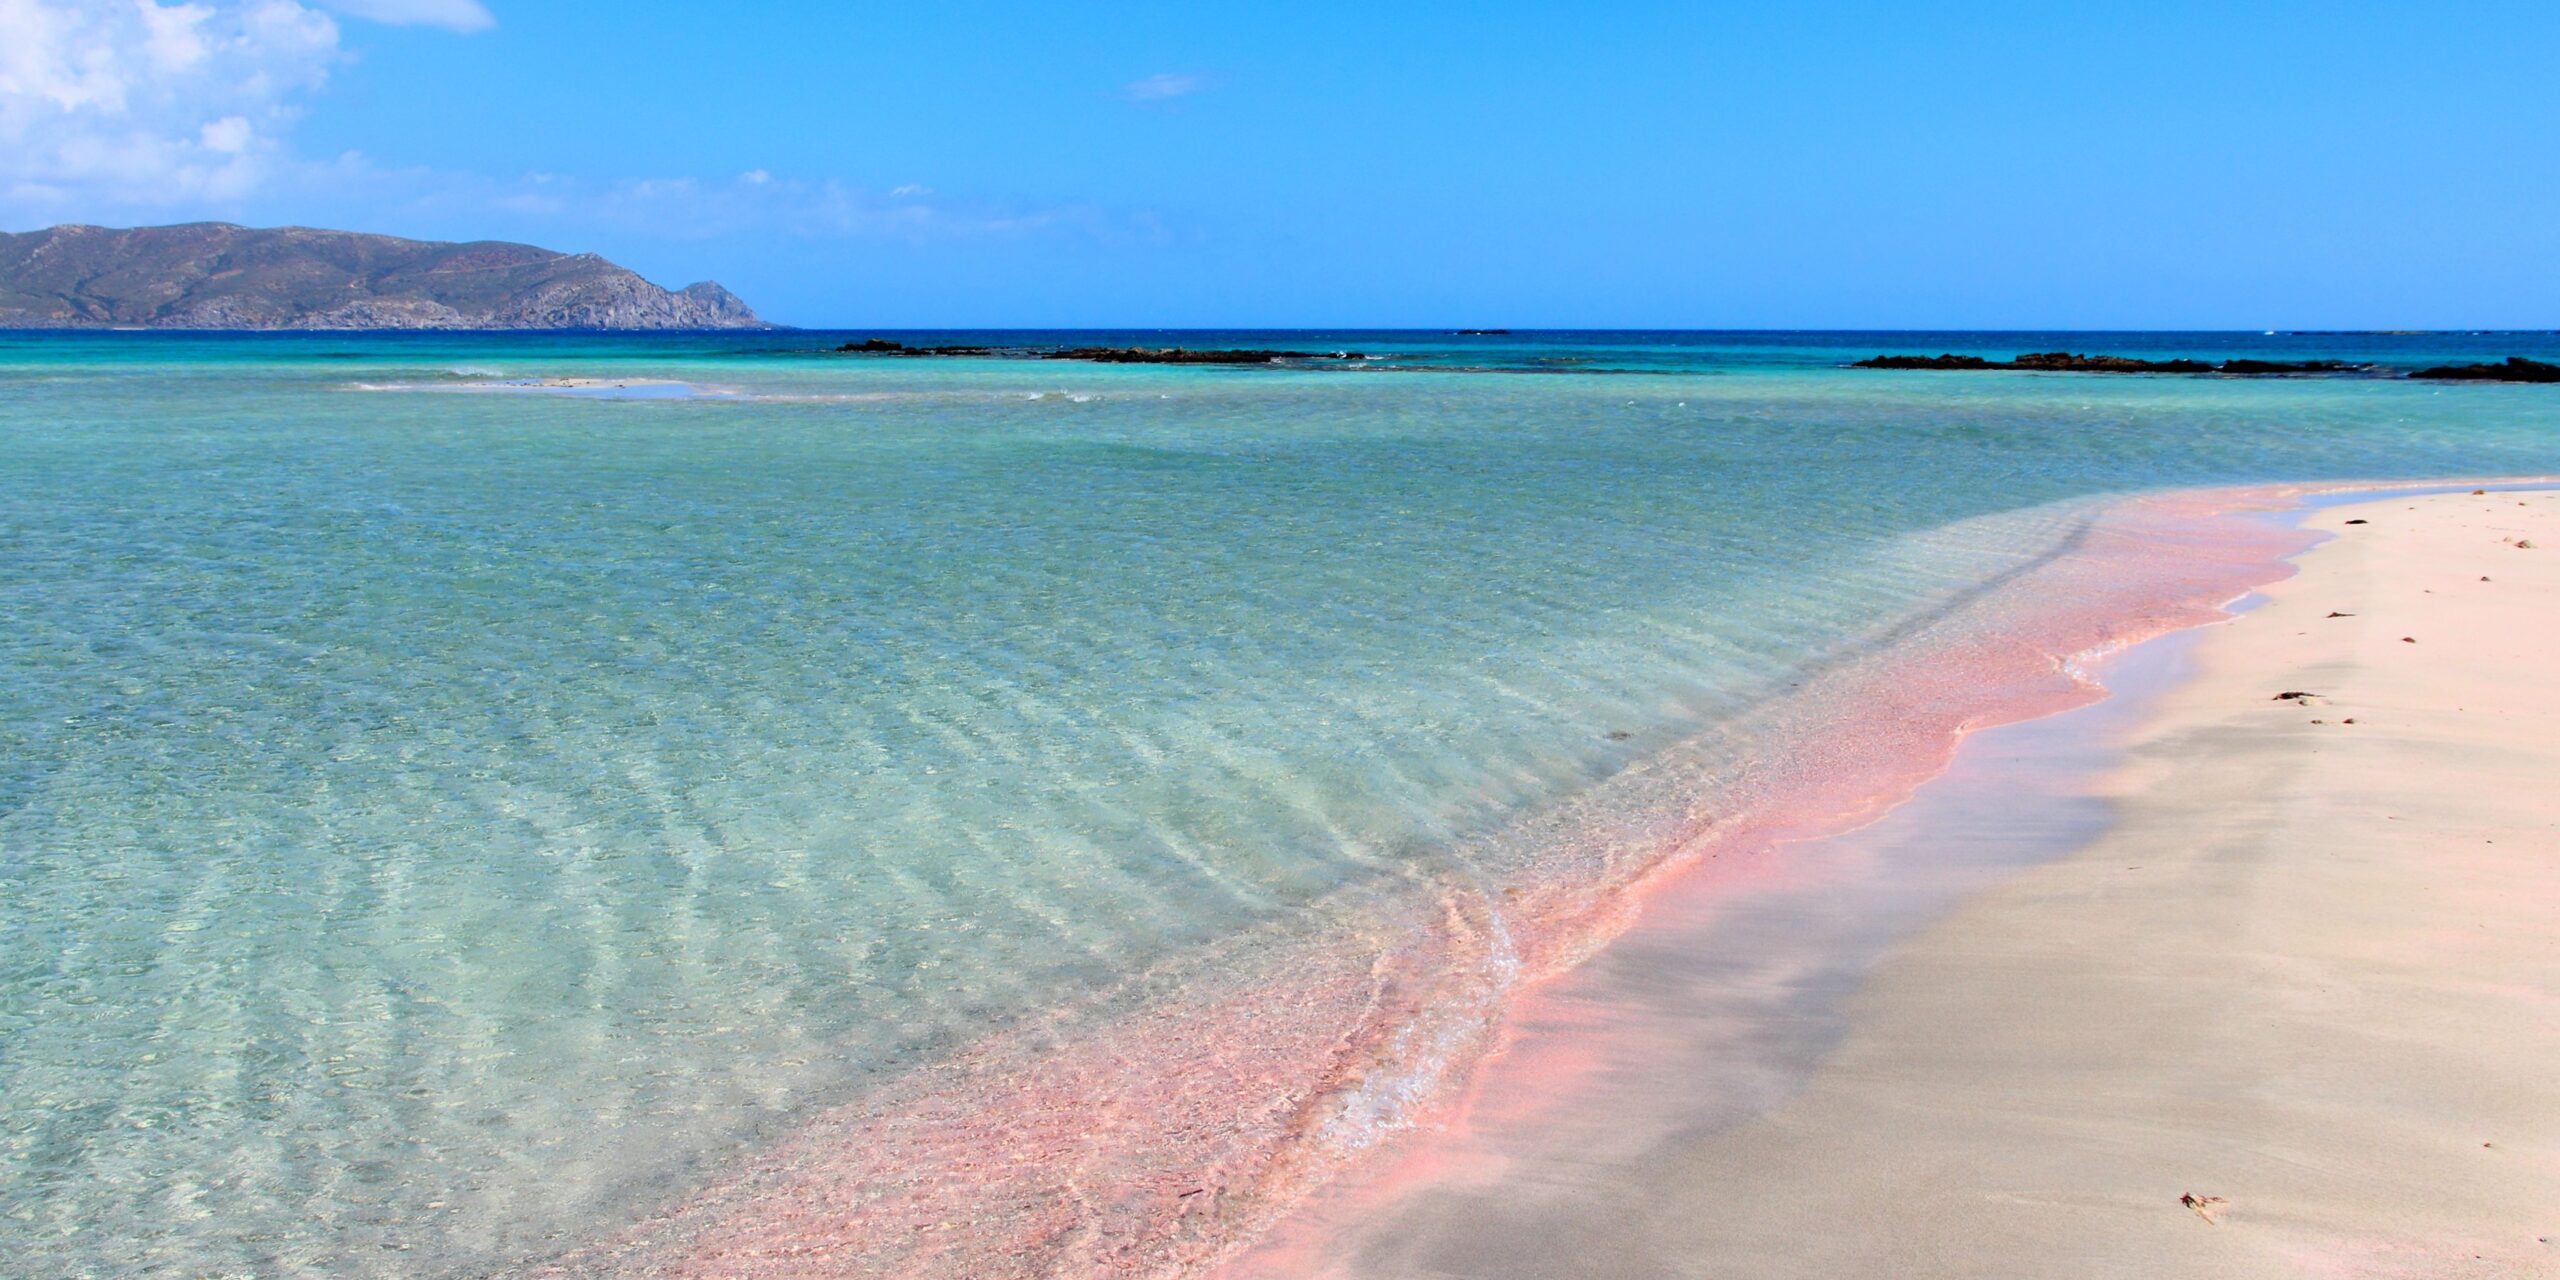 A clear turquoise sea gently laps onto a pink-tinged sandy beach with a mountainous backdrop.